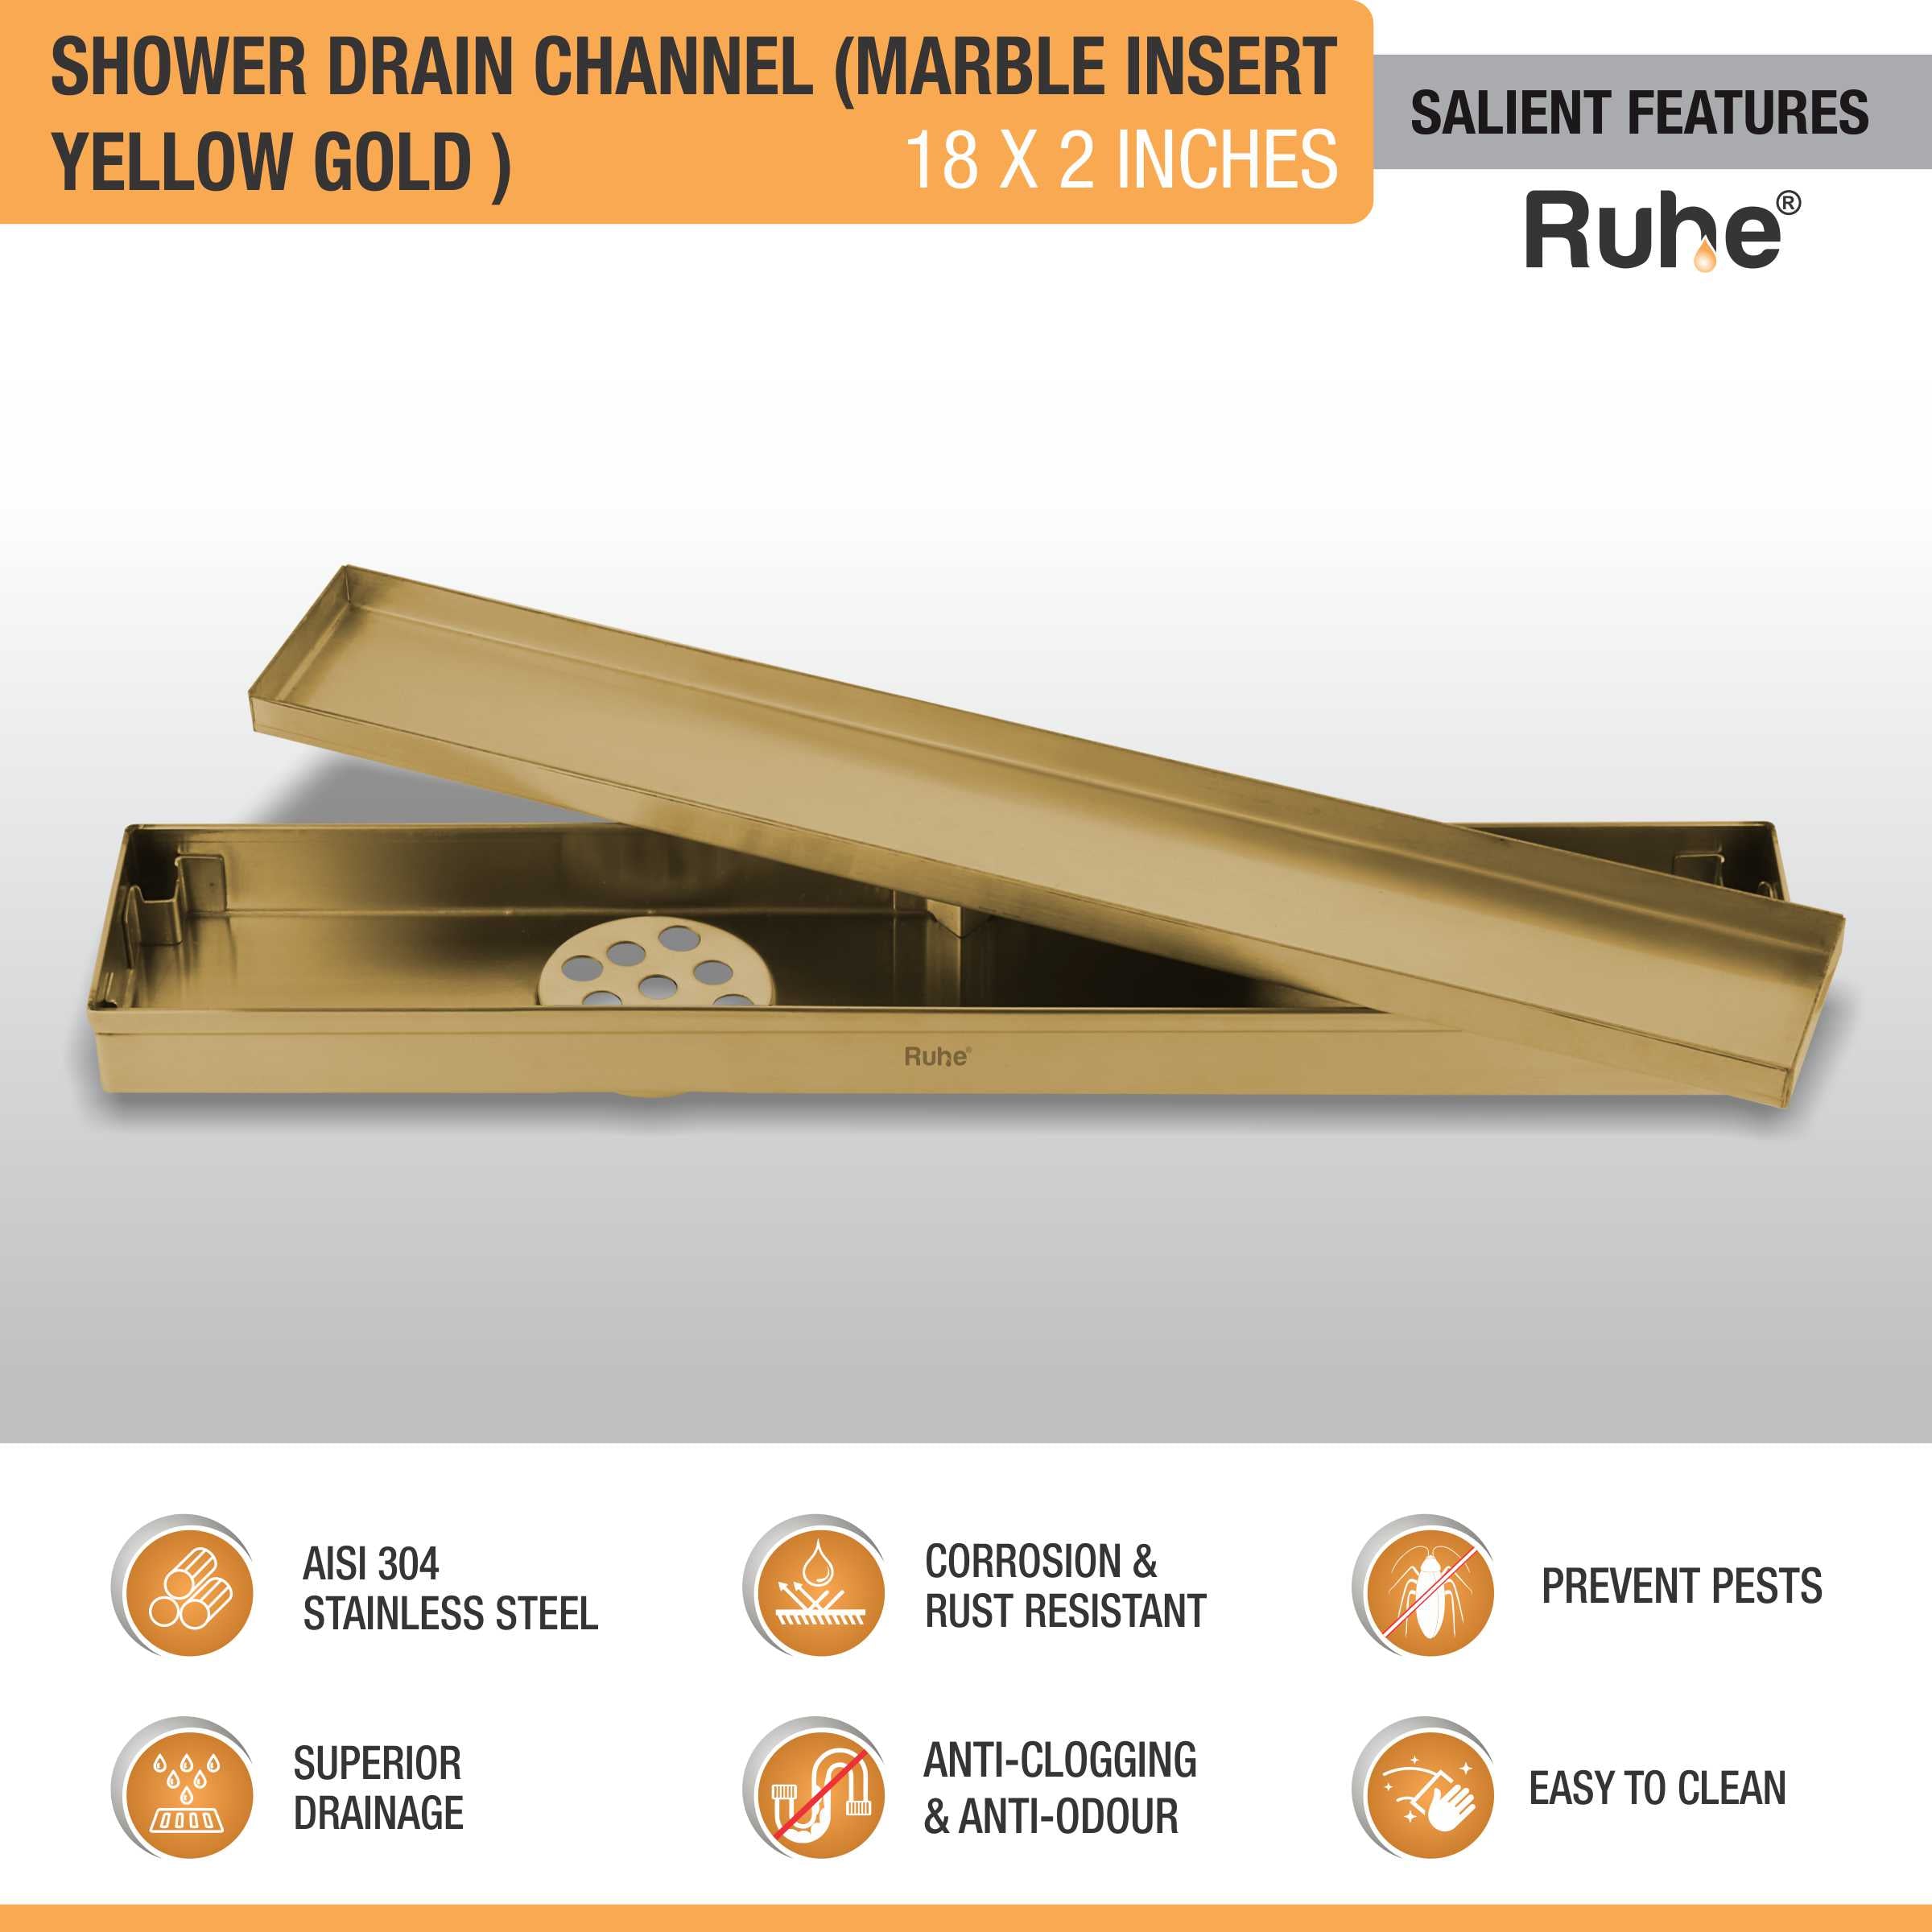 Marble Insert Shower Drain Channel (18 x 2 Inches) YELLOW GOLD features